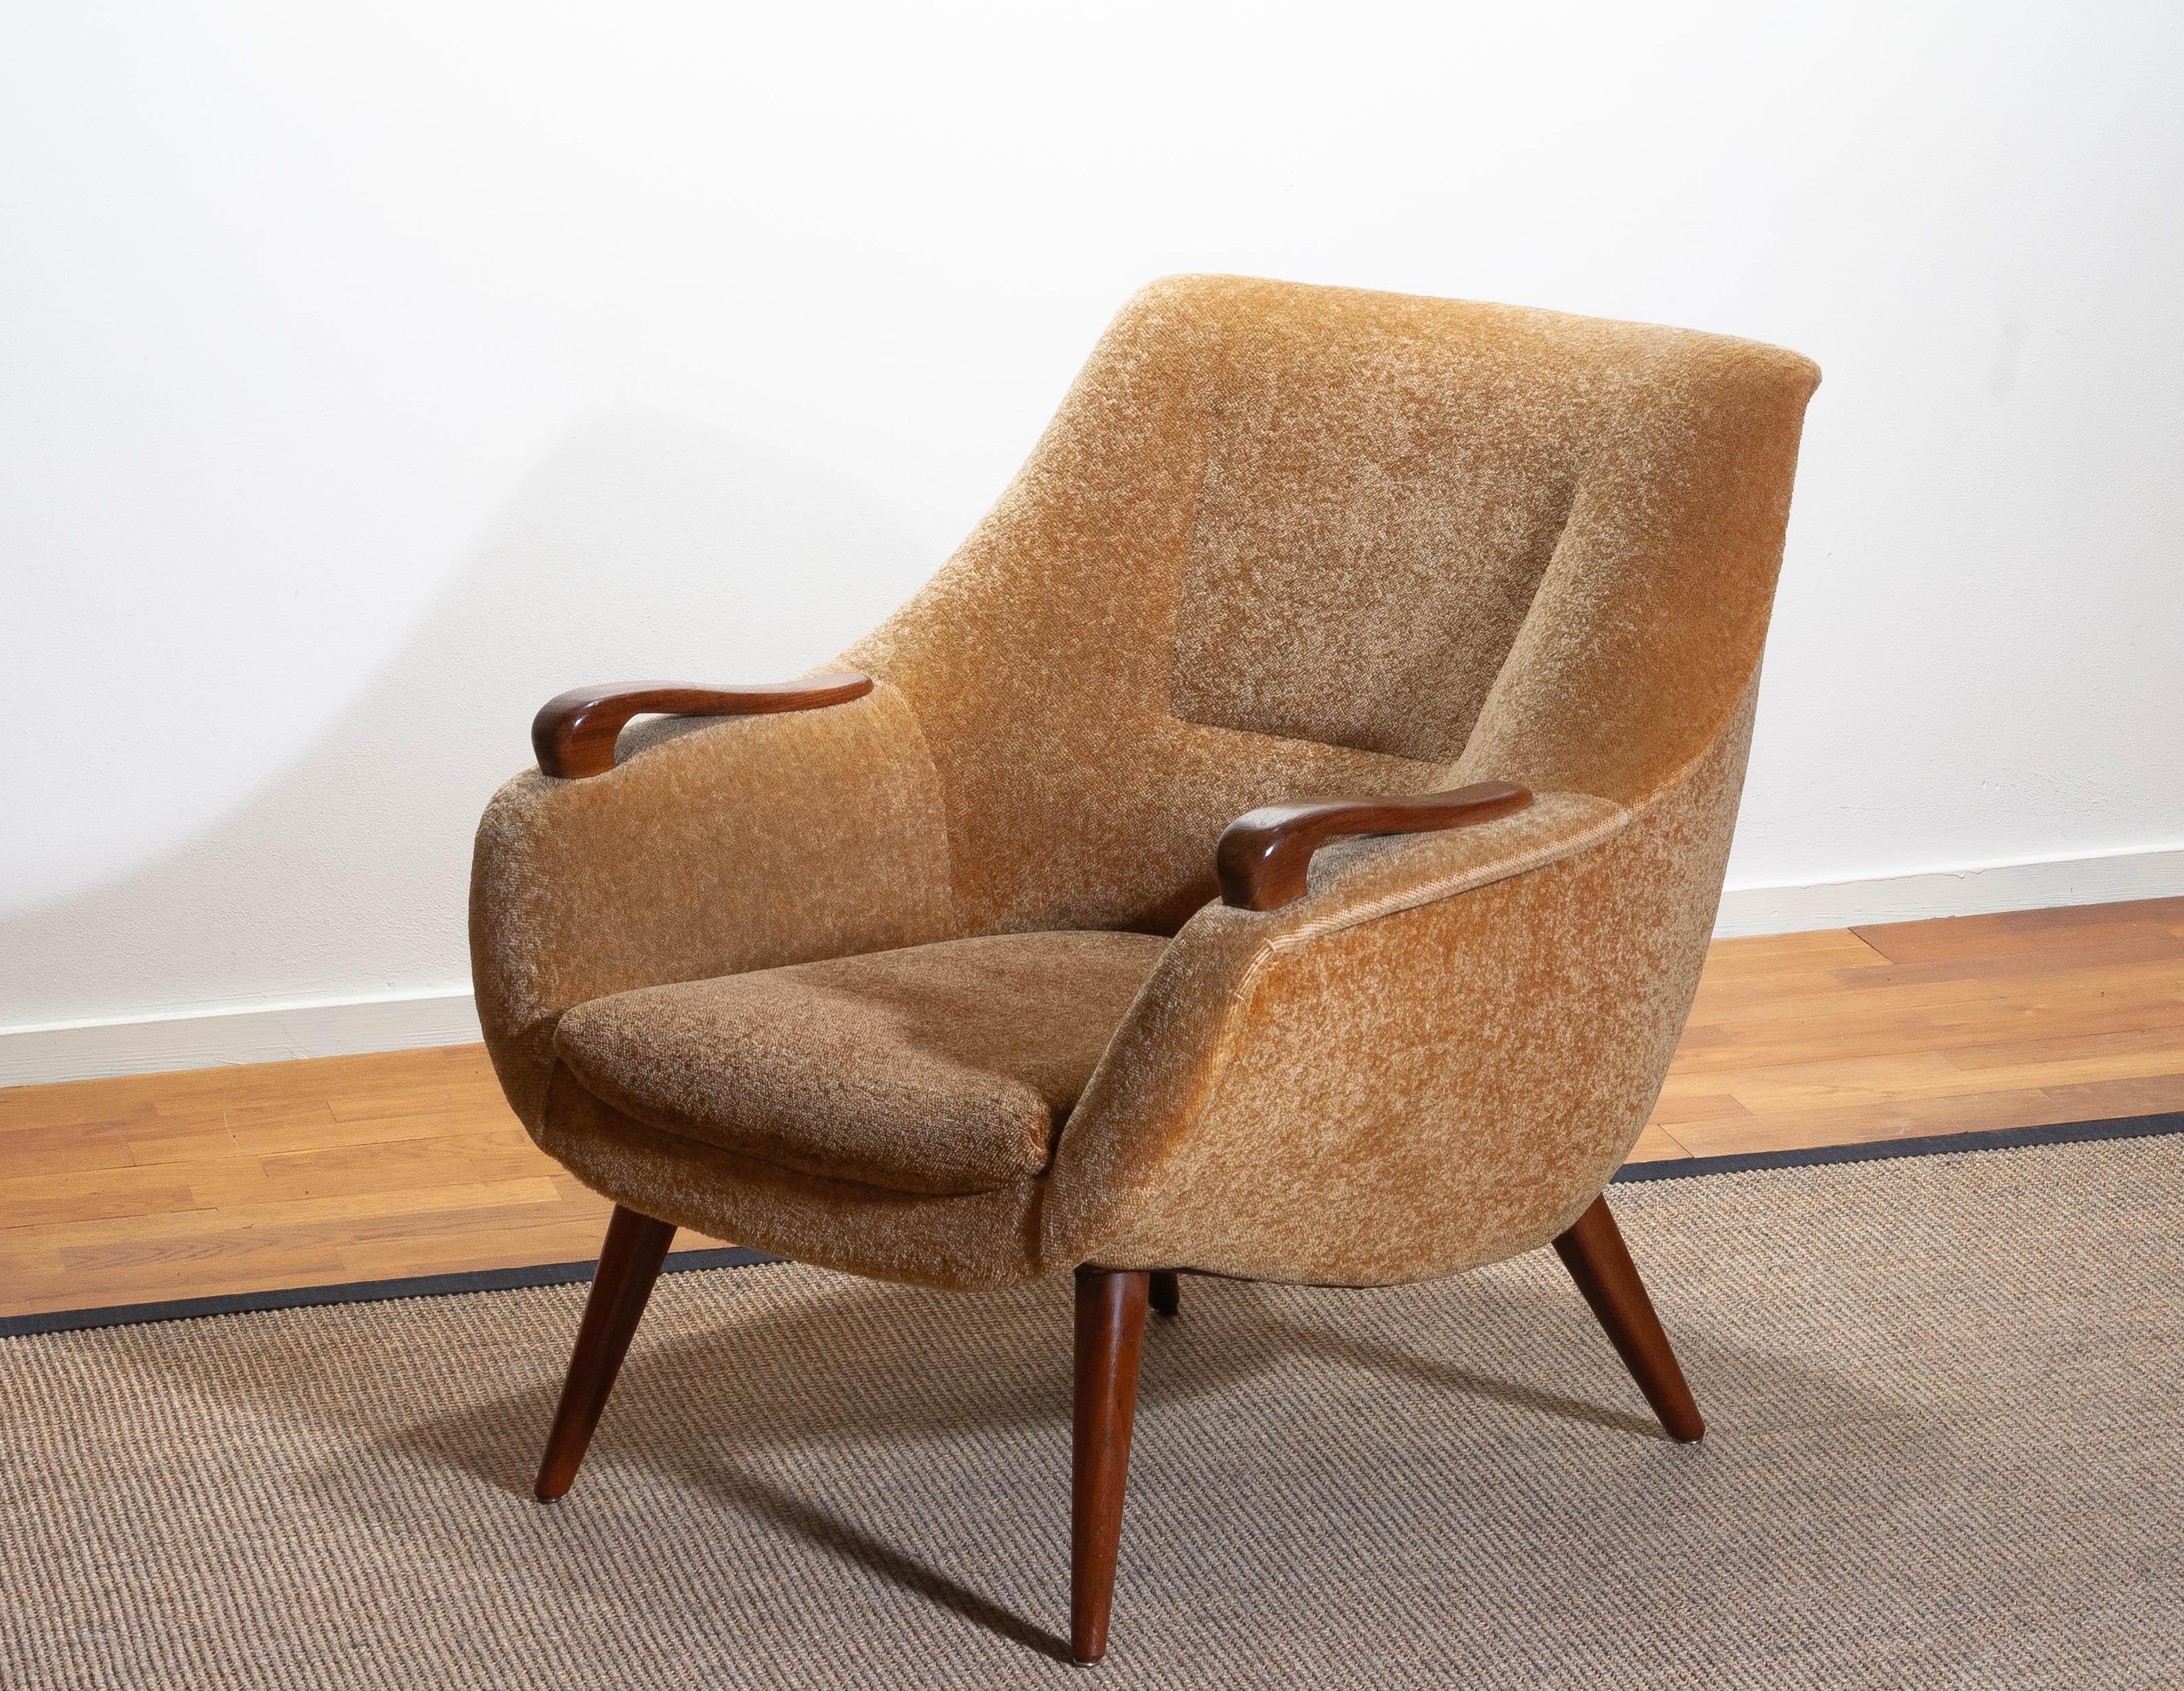 Mid-20th Century 1950s, 1 Scandinavian Lounge Club Chair in Camel Chenille and Teak, Denmark